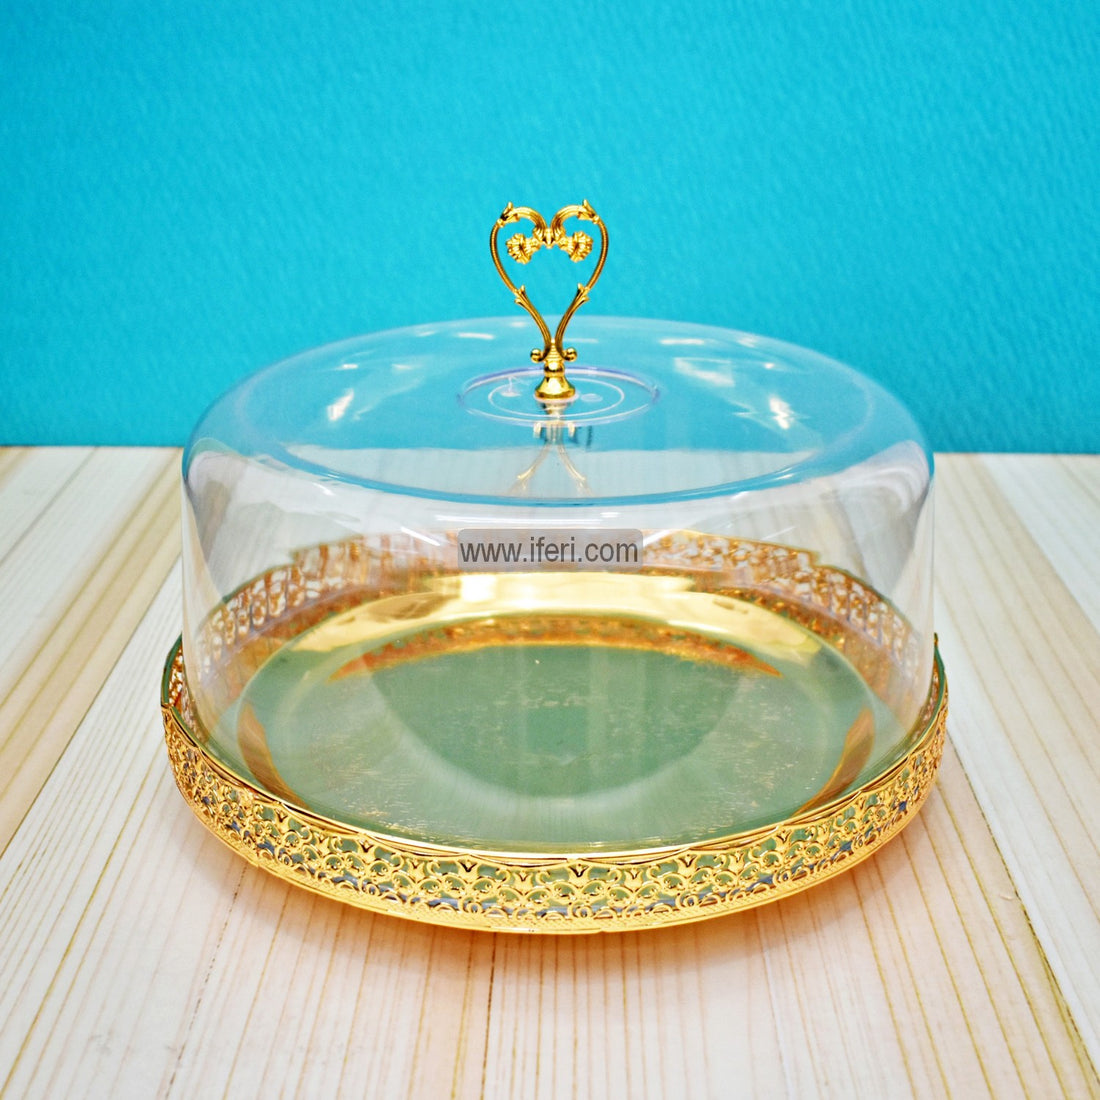 10.5 Inch Metal Cake Stand Serving Platter Cake Plate with Dome Cover FH2156